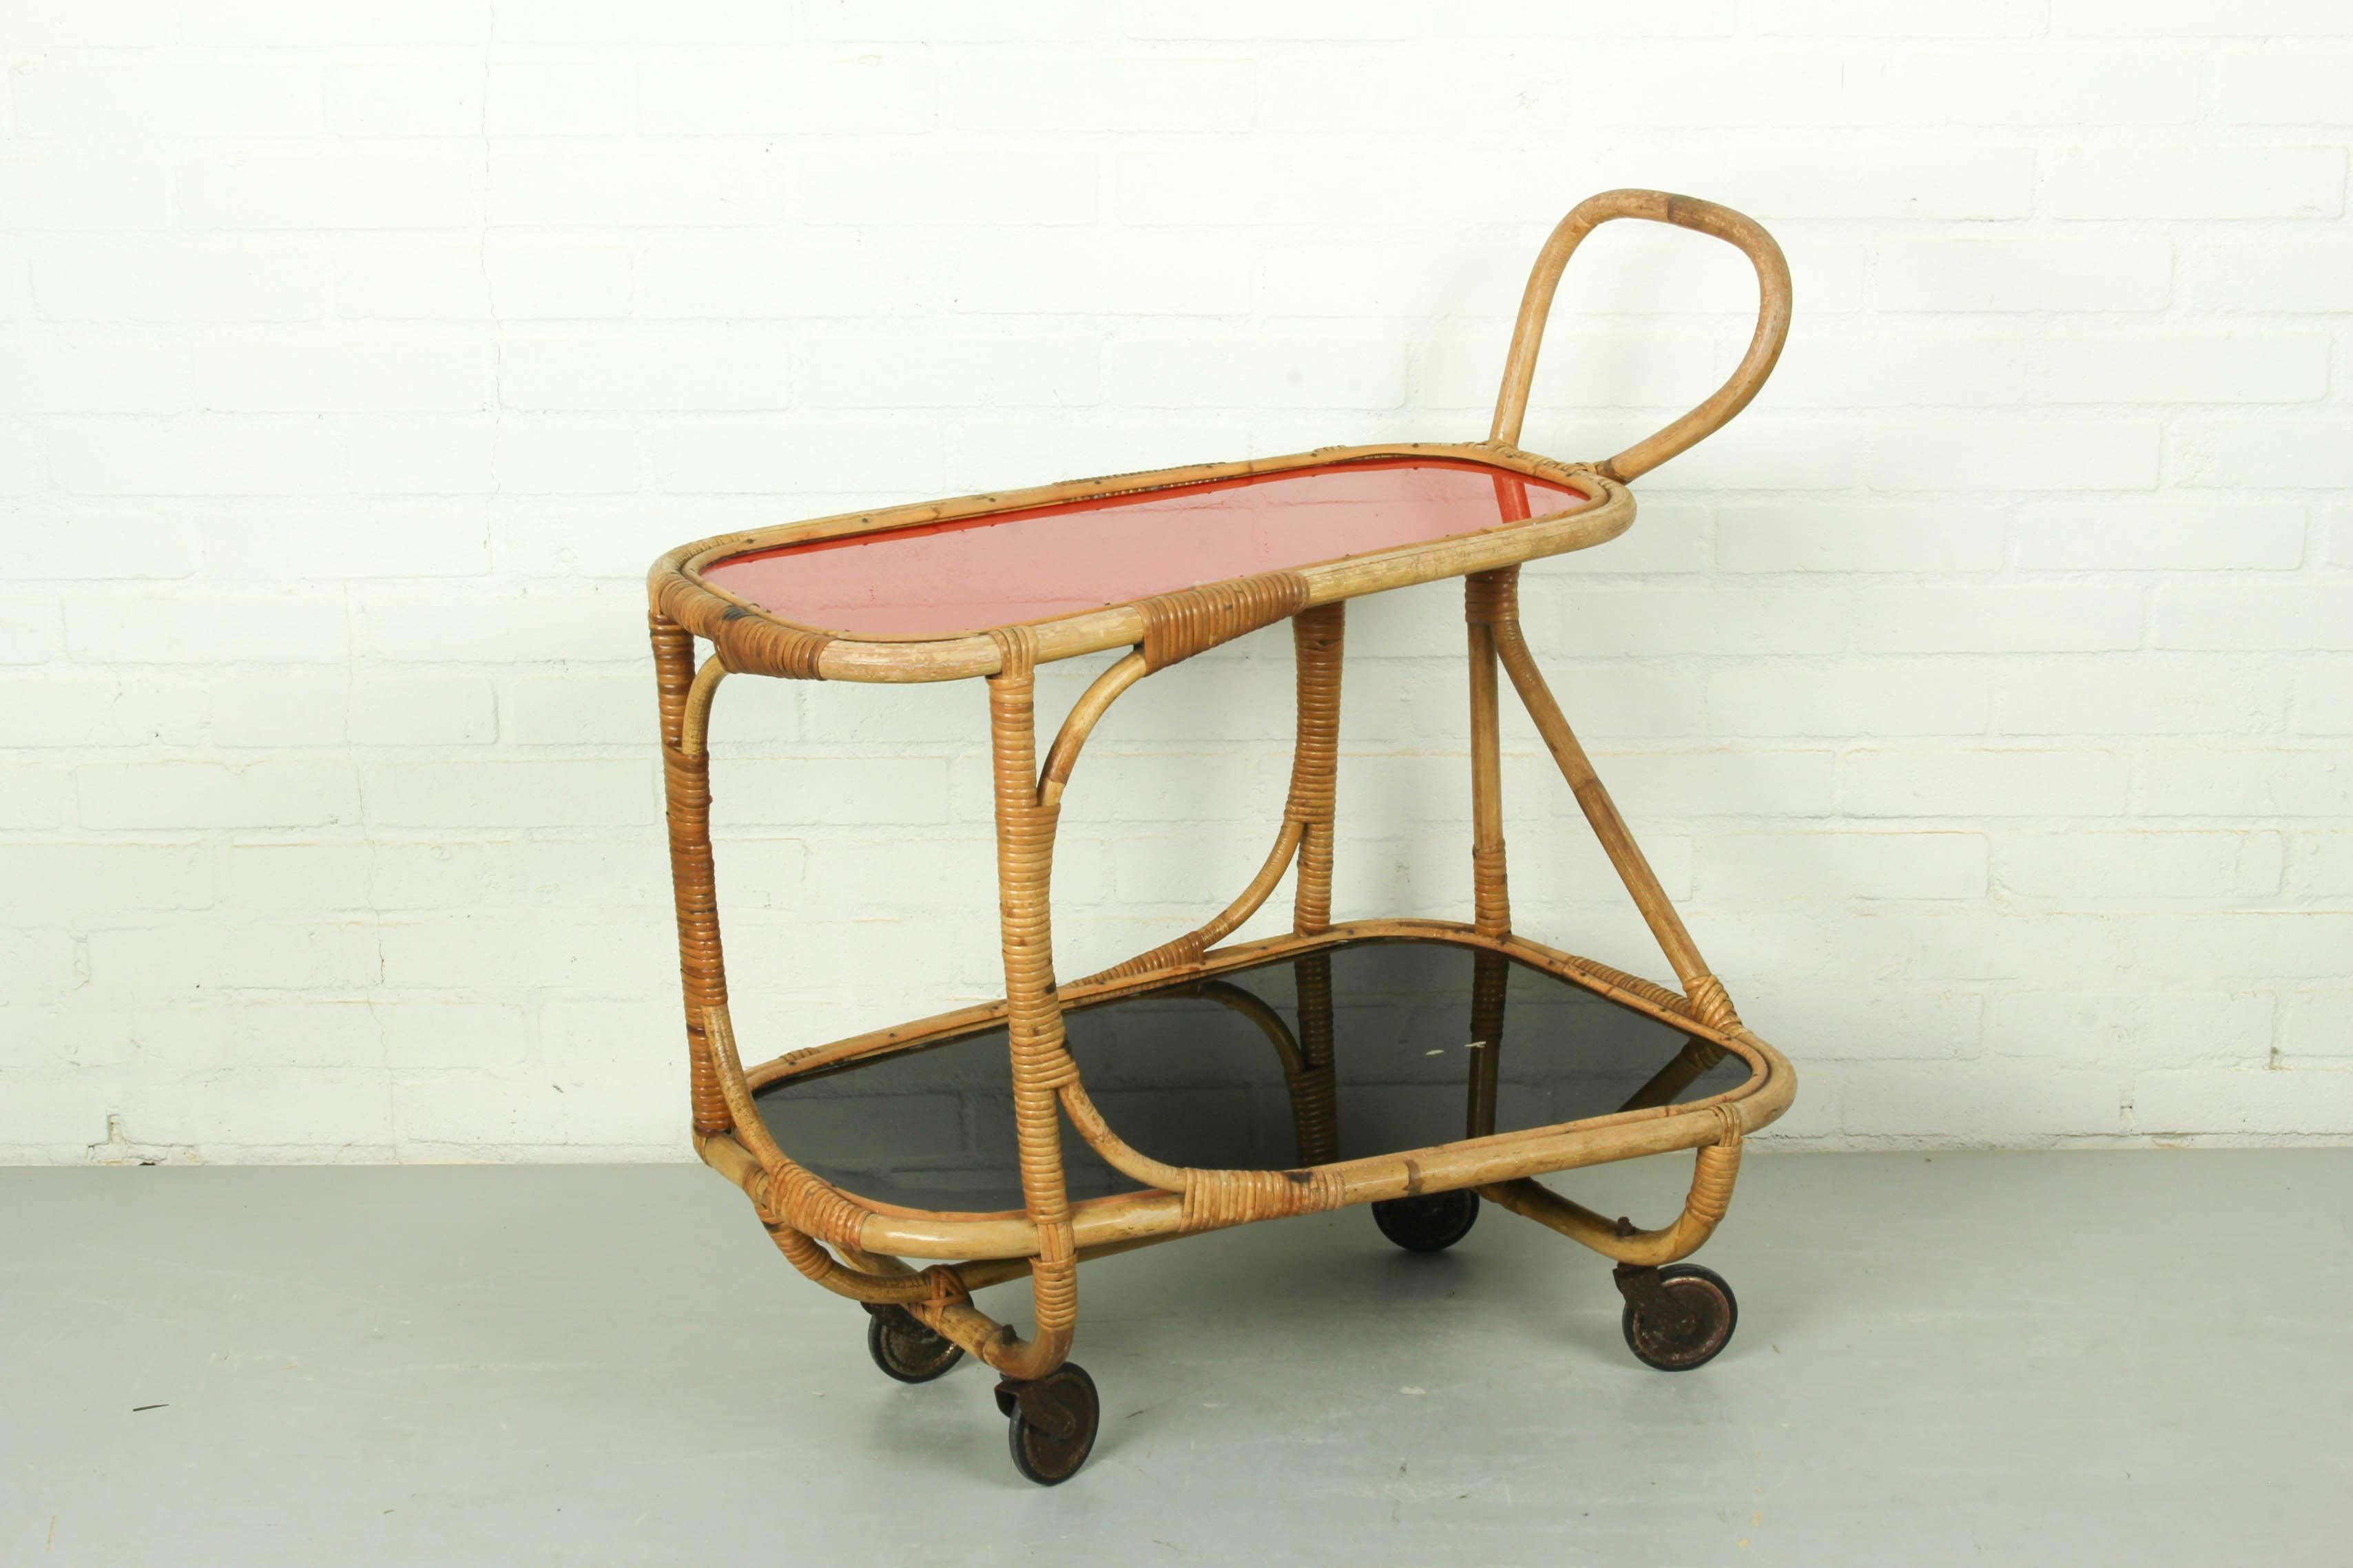 This bamboo / rattan bar cart from the 1940s features a red and a black shelf. Vintage, Mid-century, Hand-crafted. Dimensions: 76cm H, 73cm L x 45cm D.
  